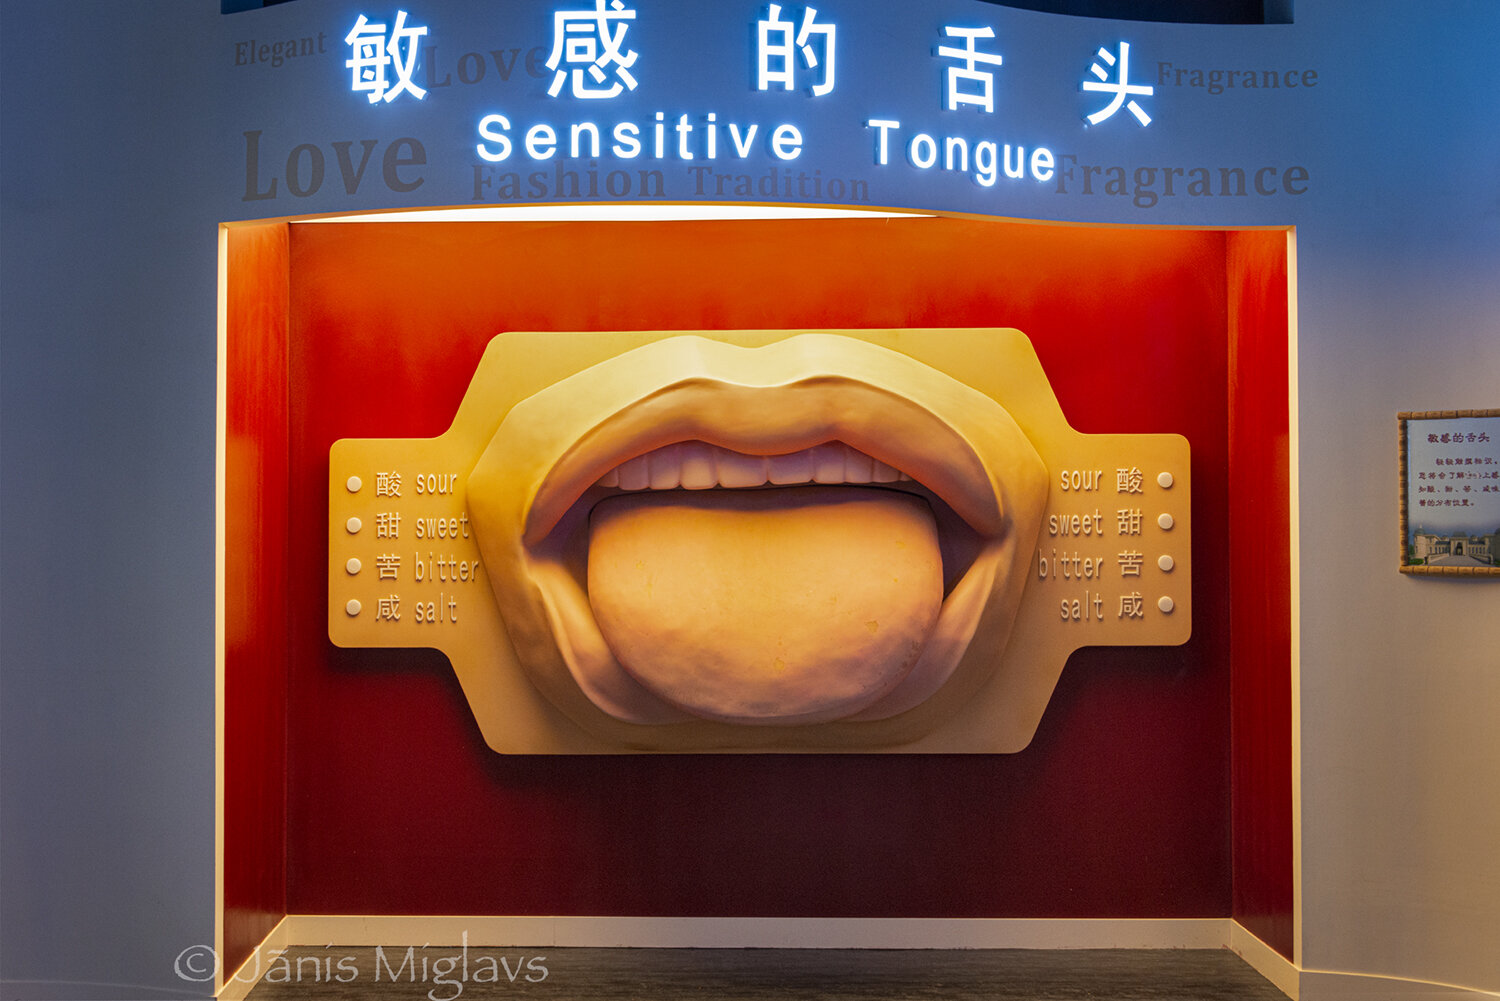 Display showing taste bud locations on tongue at Changyu Moser XV winery.